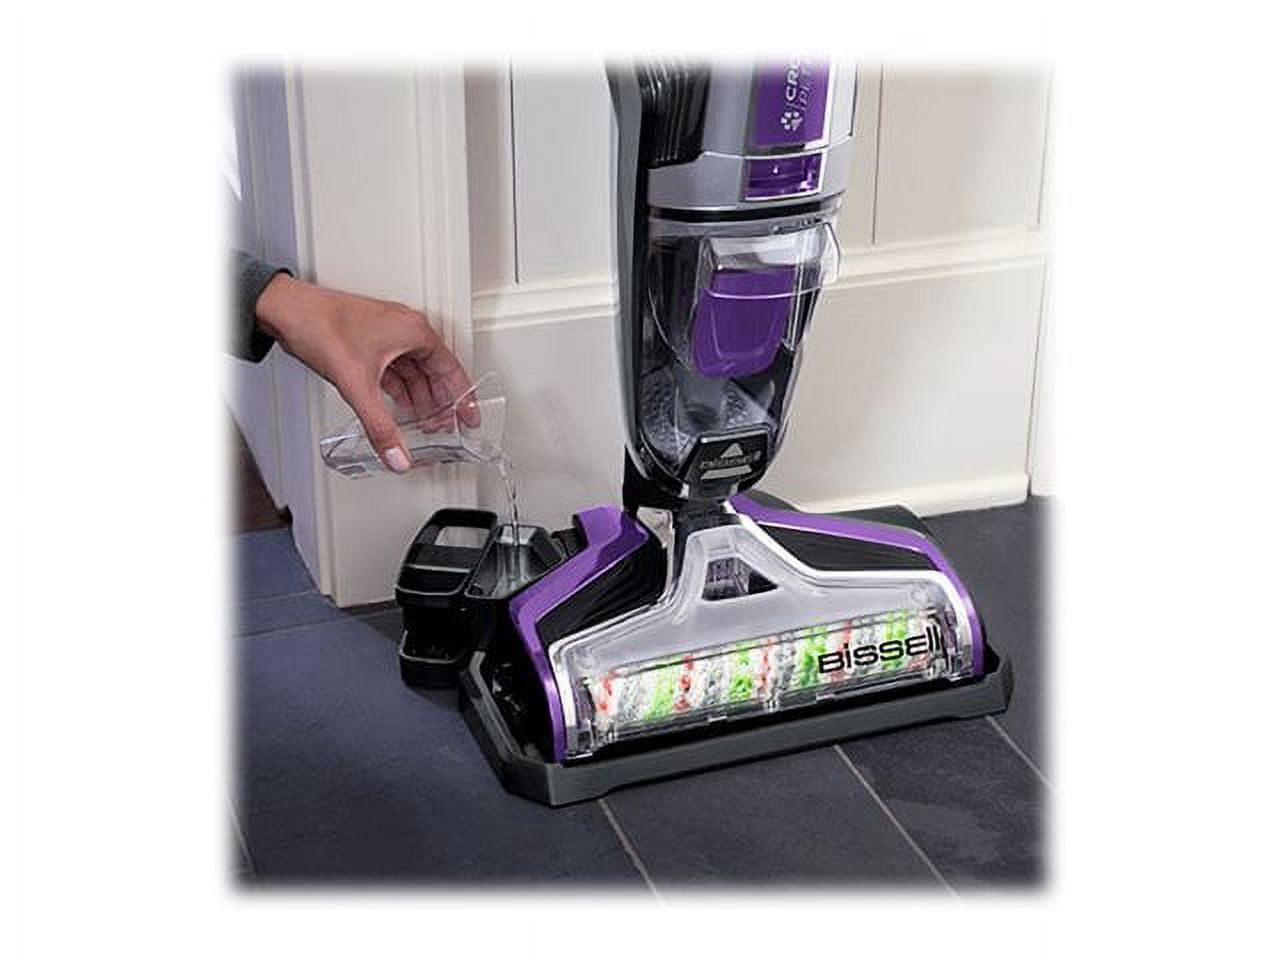 BISSELL Crosswave Pet Pro All in One Wet Dry Vacuum Cleaner and Mop for  Hard Floors and Area Rugs, Purple, 2306A